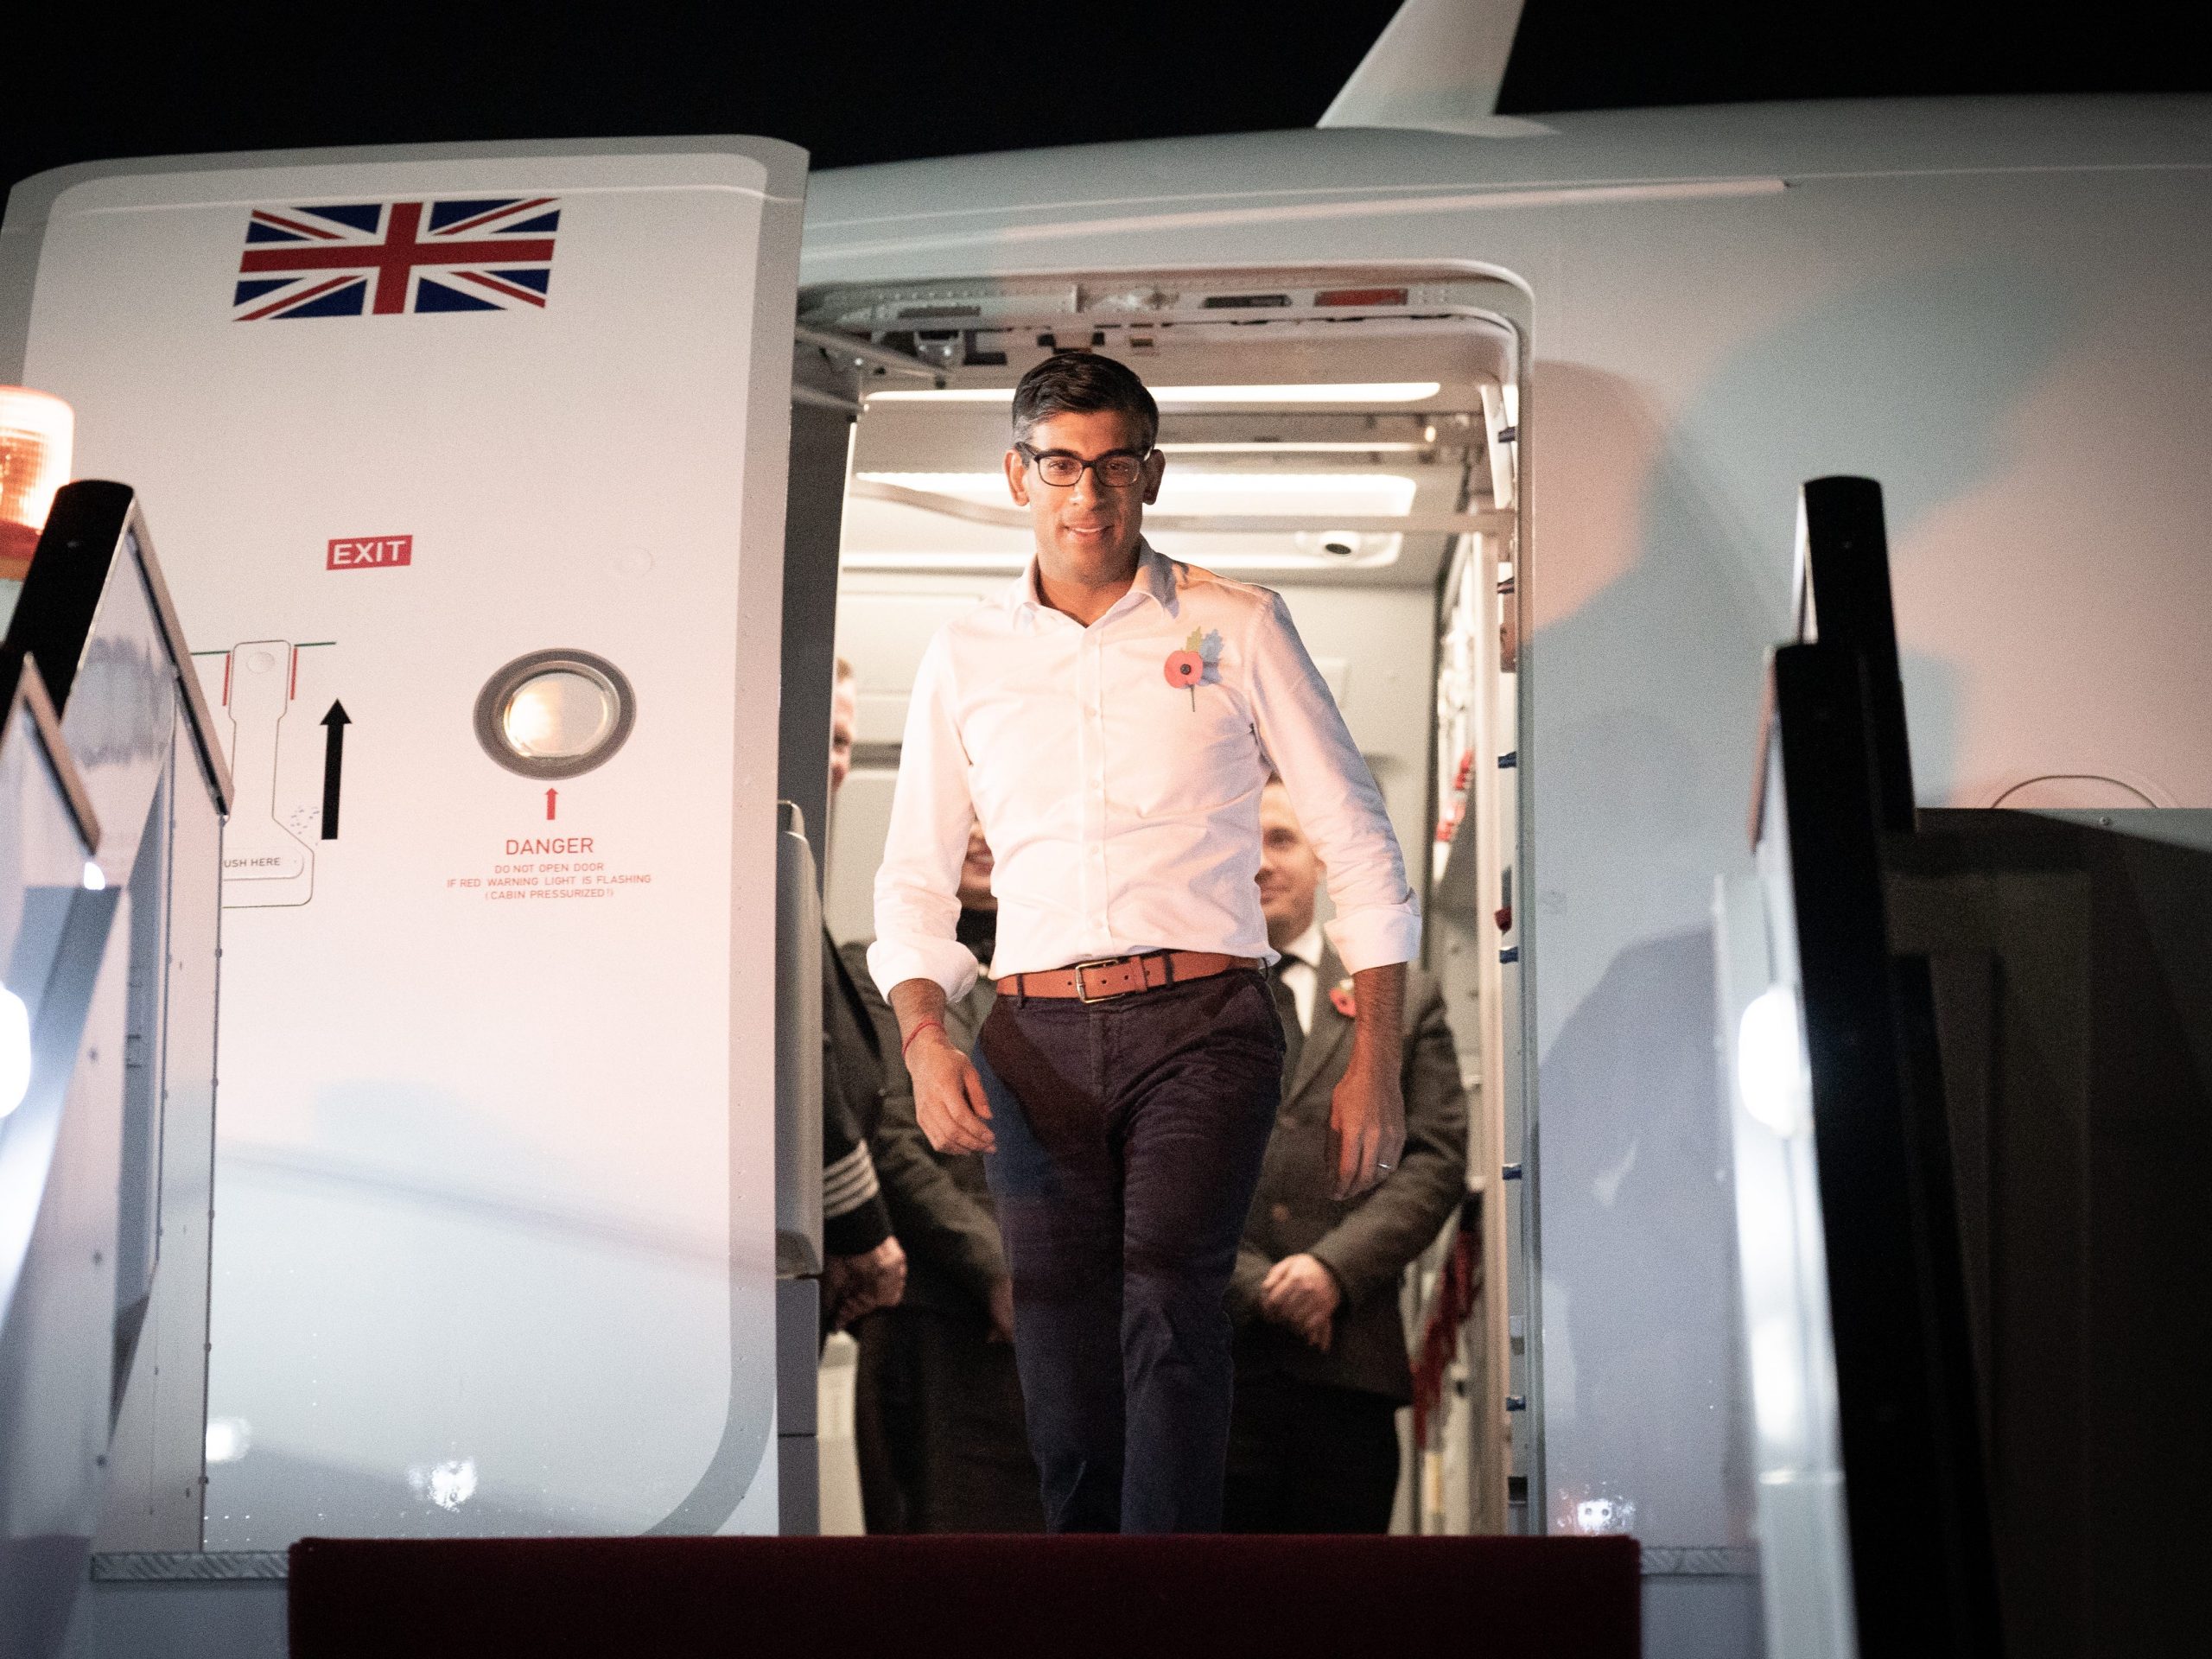 SHARM EL SHEIKH, EGYPT - NOVEMBER 06: British Prime Minister Rishi Sunak arriving in Sharm el-Sheikh, Egypt, to attend the Cop27 summit on November 6, 2022 in Sharm El Sheikh, Egypt. (Photo by Stefan Rousseau - Pool/Getty Images)